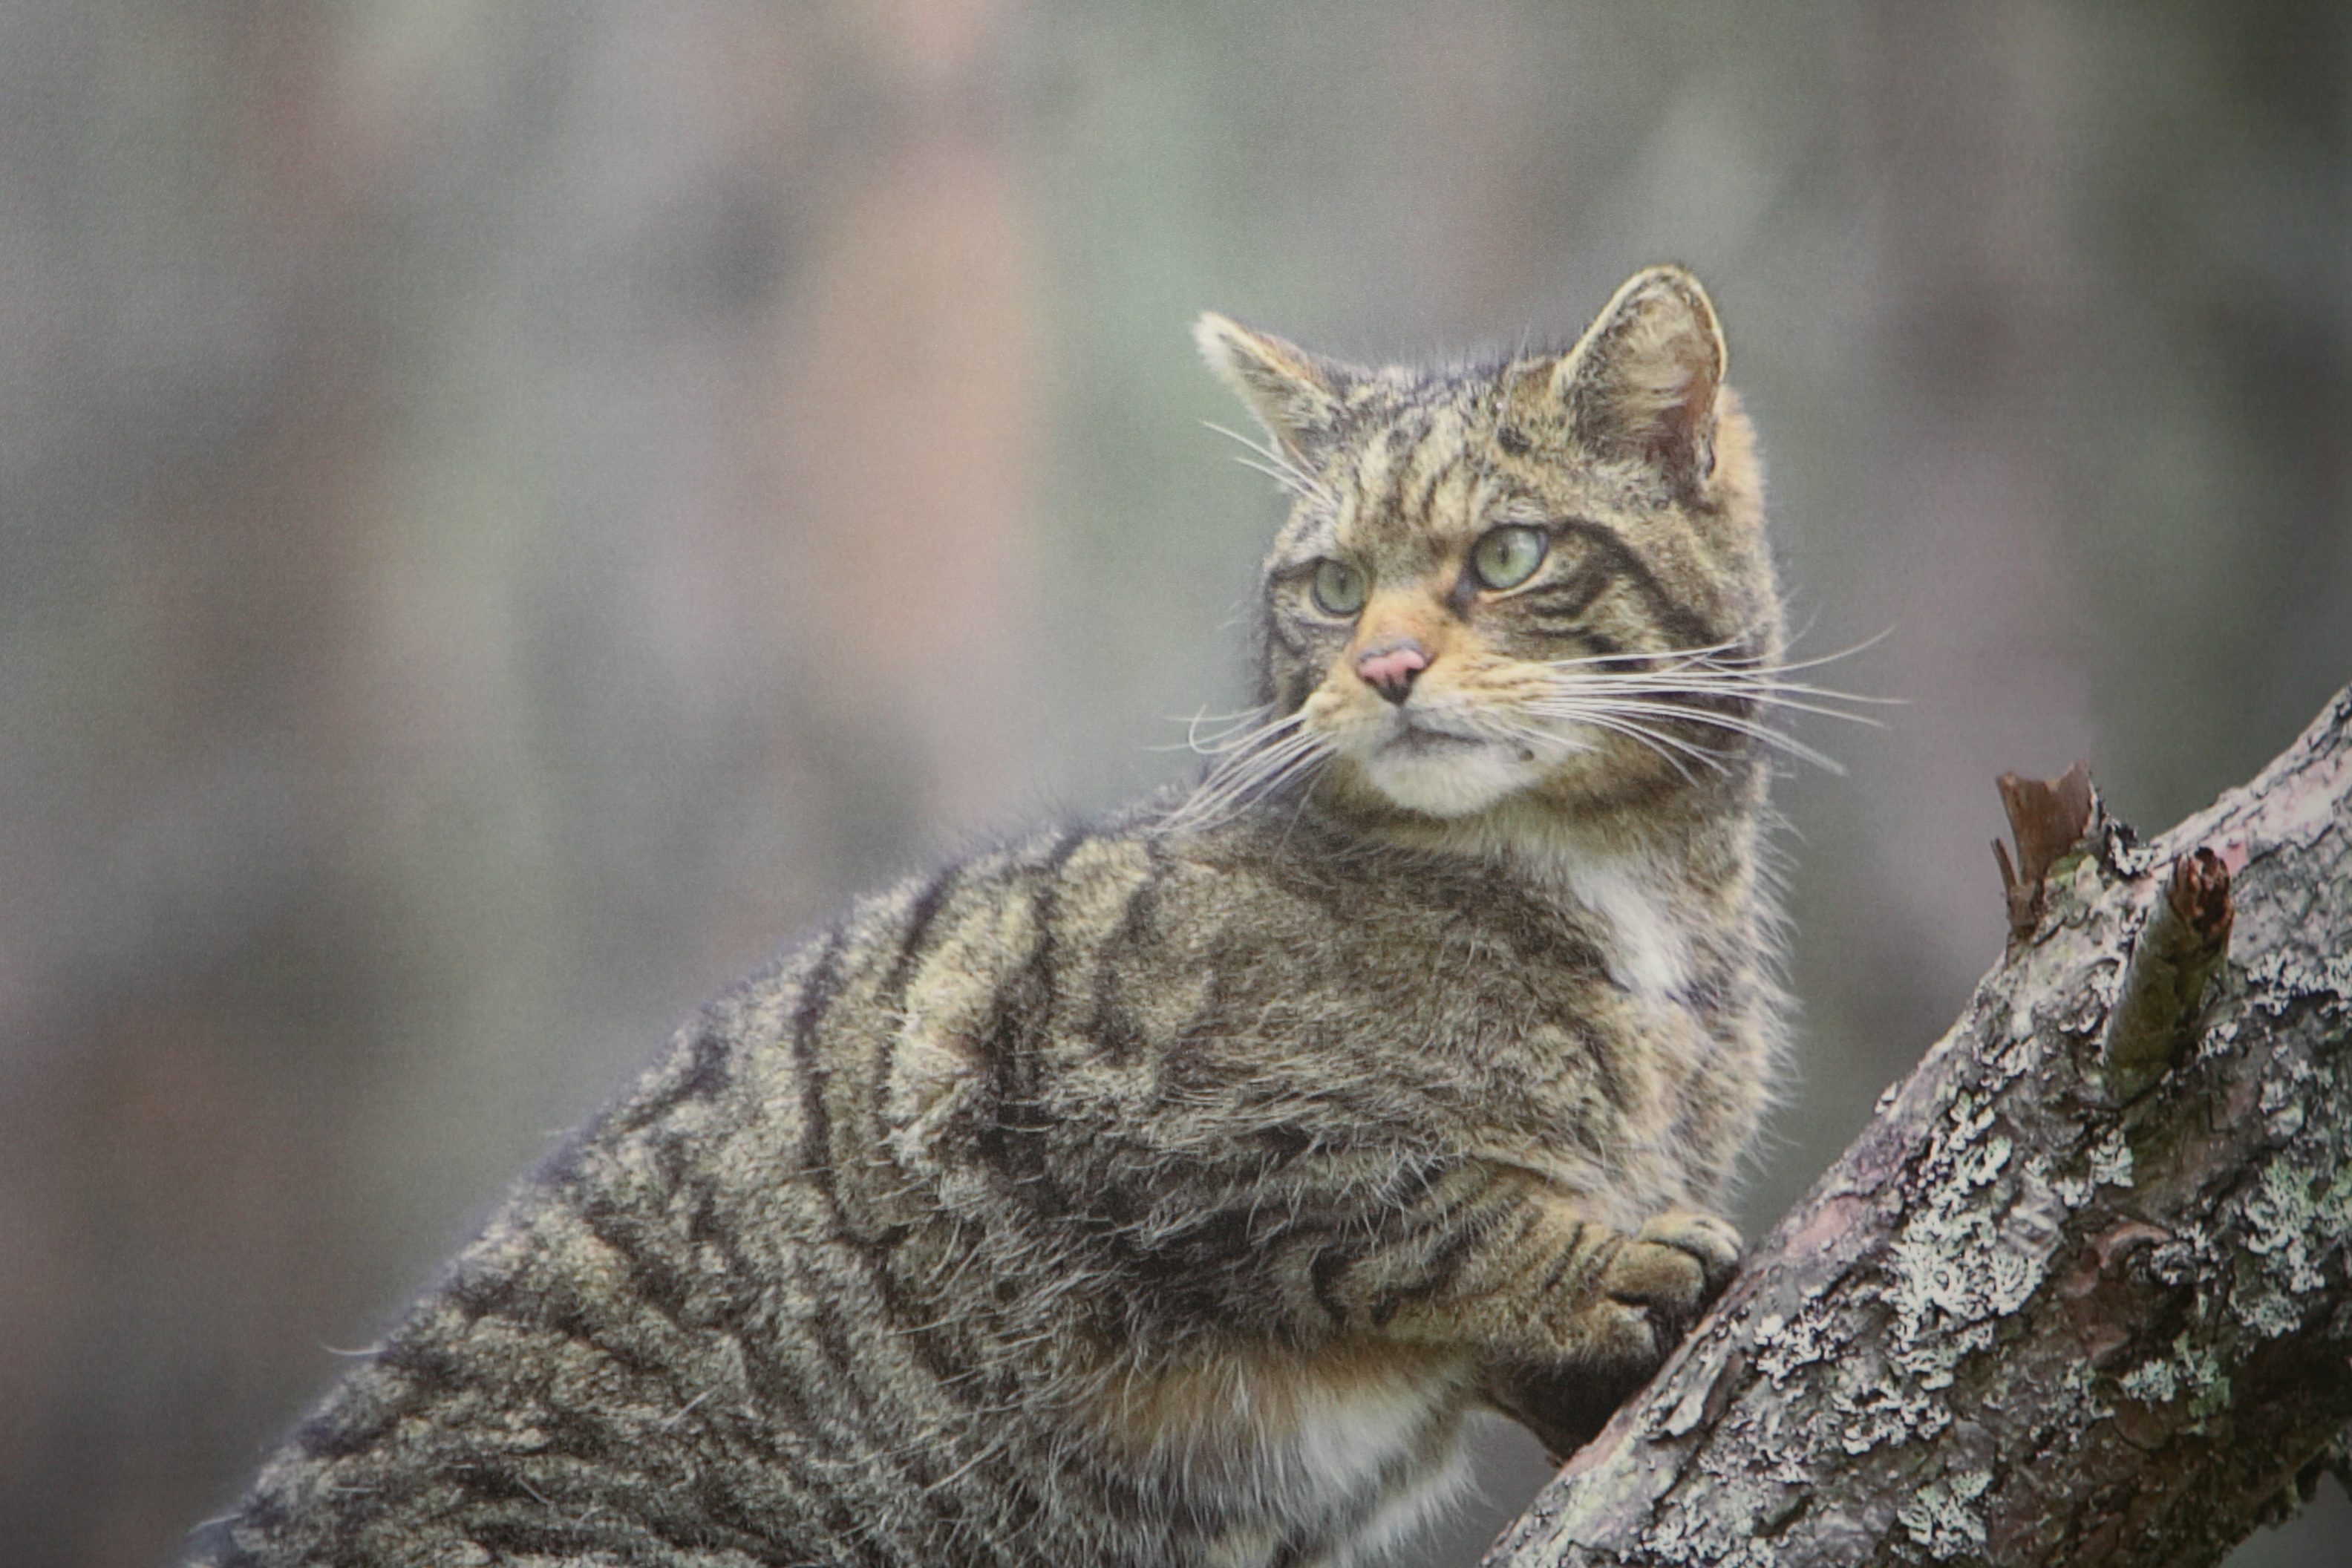 Return Of England S Wildcats Animals To Be Reintroduced After Being Declared Extinct In 19th Century The Independent The Independent